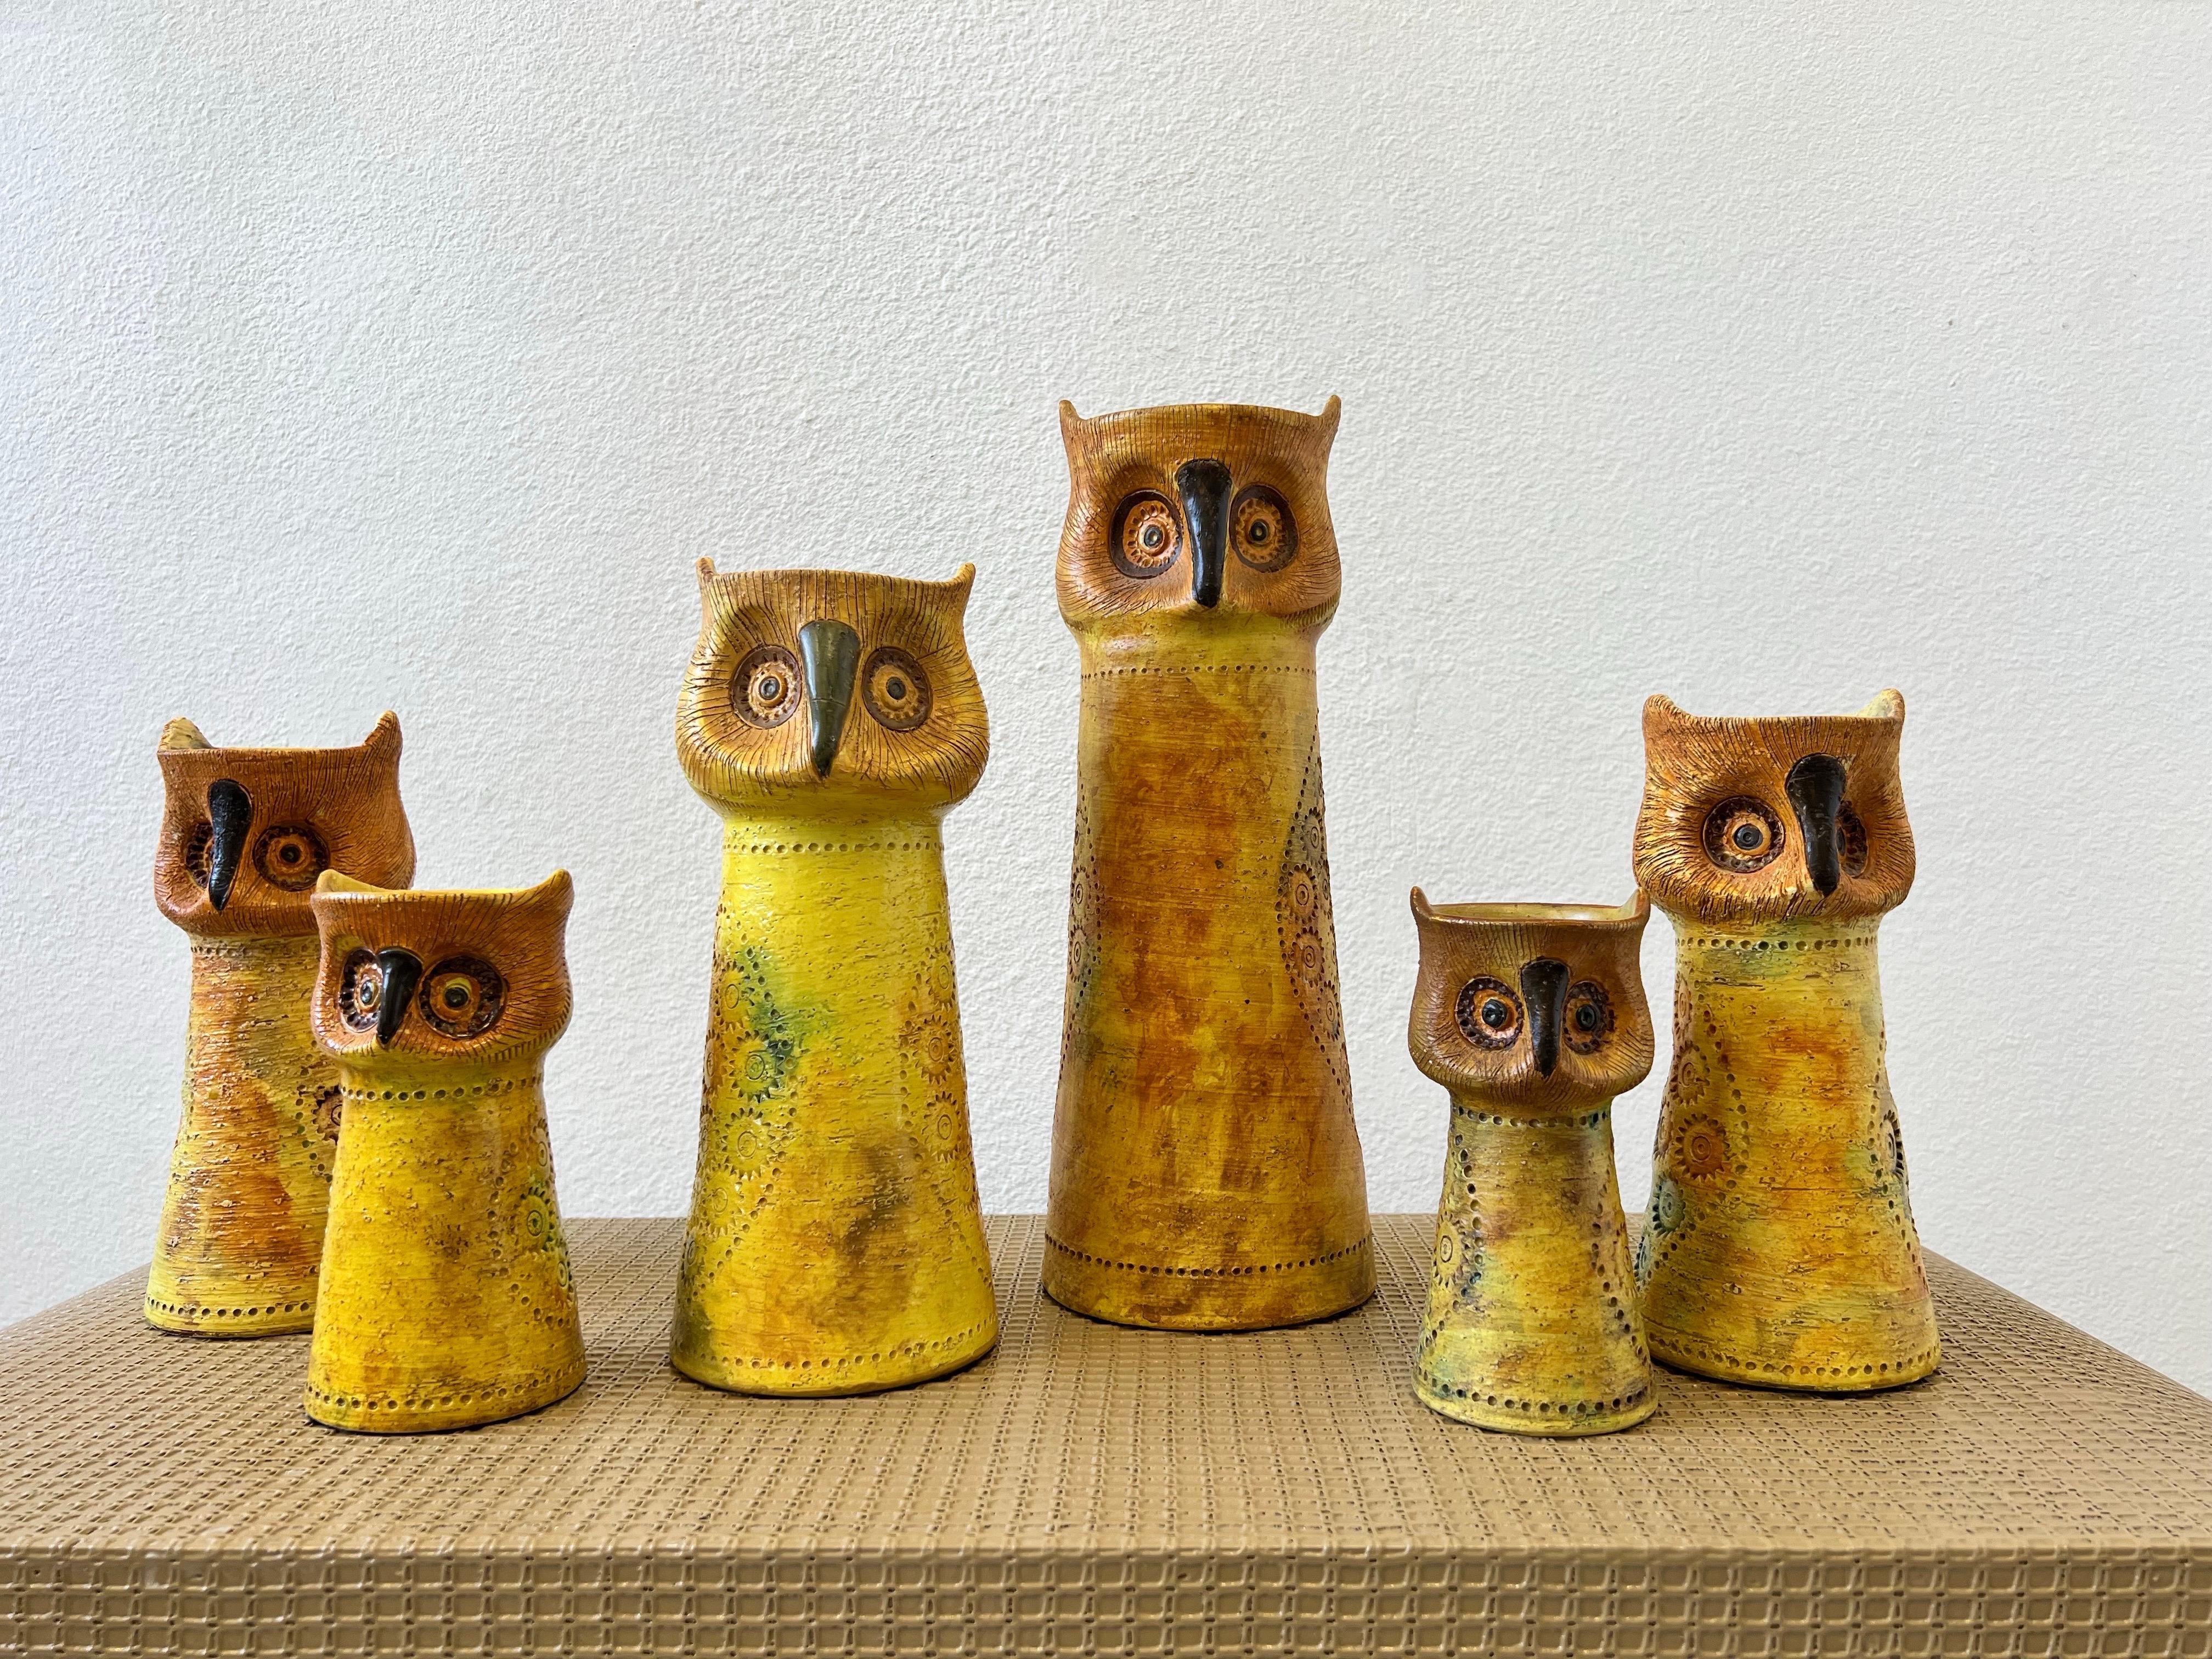 A rare set of six Italian ceramic owls by Aldo Londi for Bitossi, imported by Rosenthal & Netter. five of the owls are candleholder and one is a vase. All of the owls are marked made in Italy and have the Rosenthal & Netter label. 
In beautiful